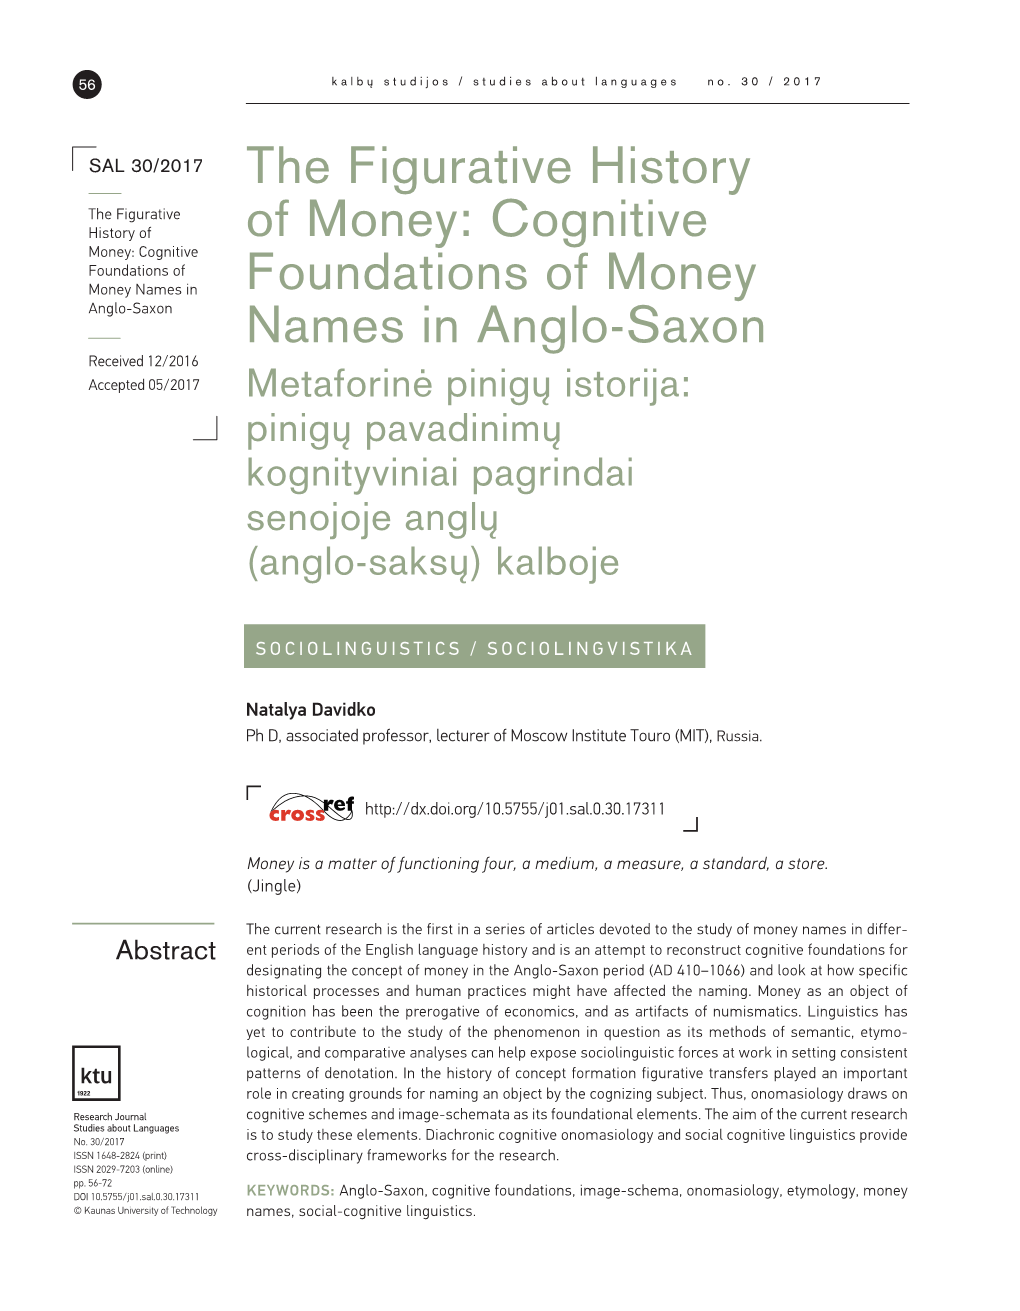 Cognitive Foundations of Money Names